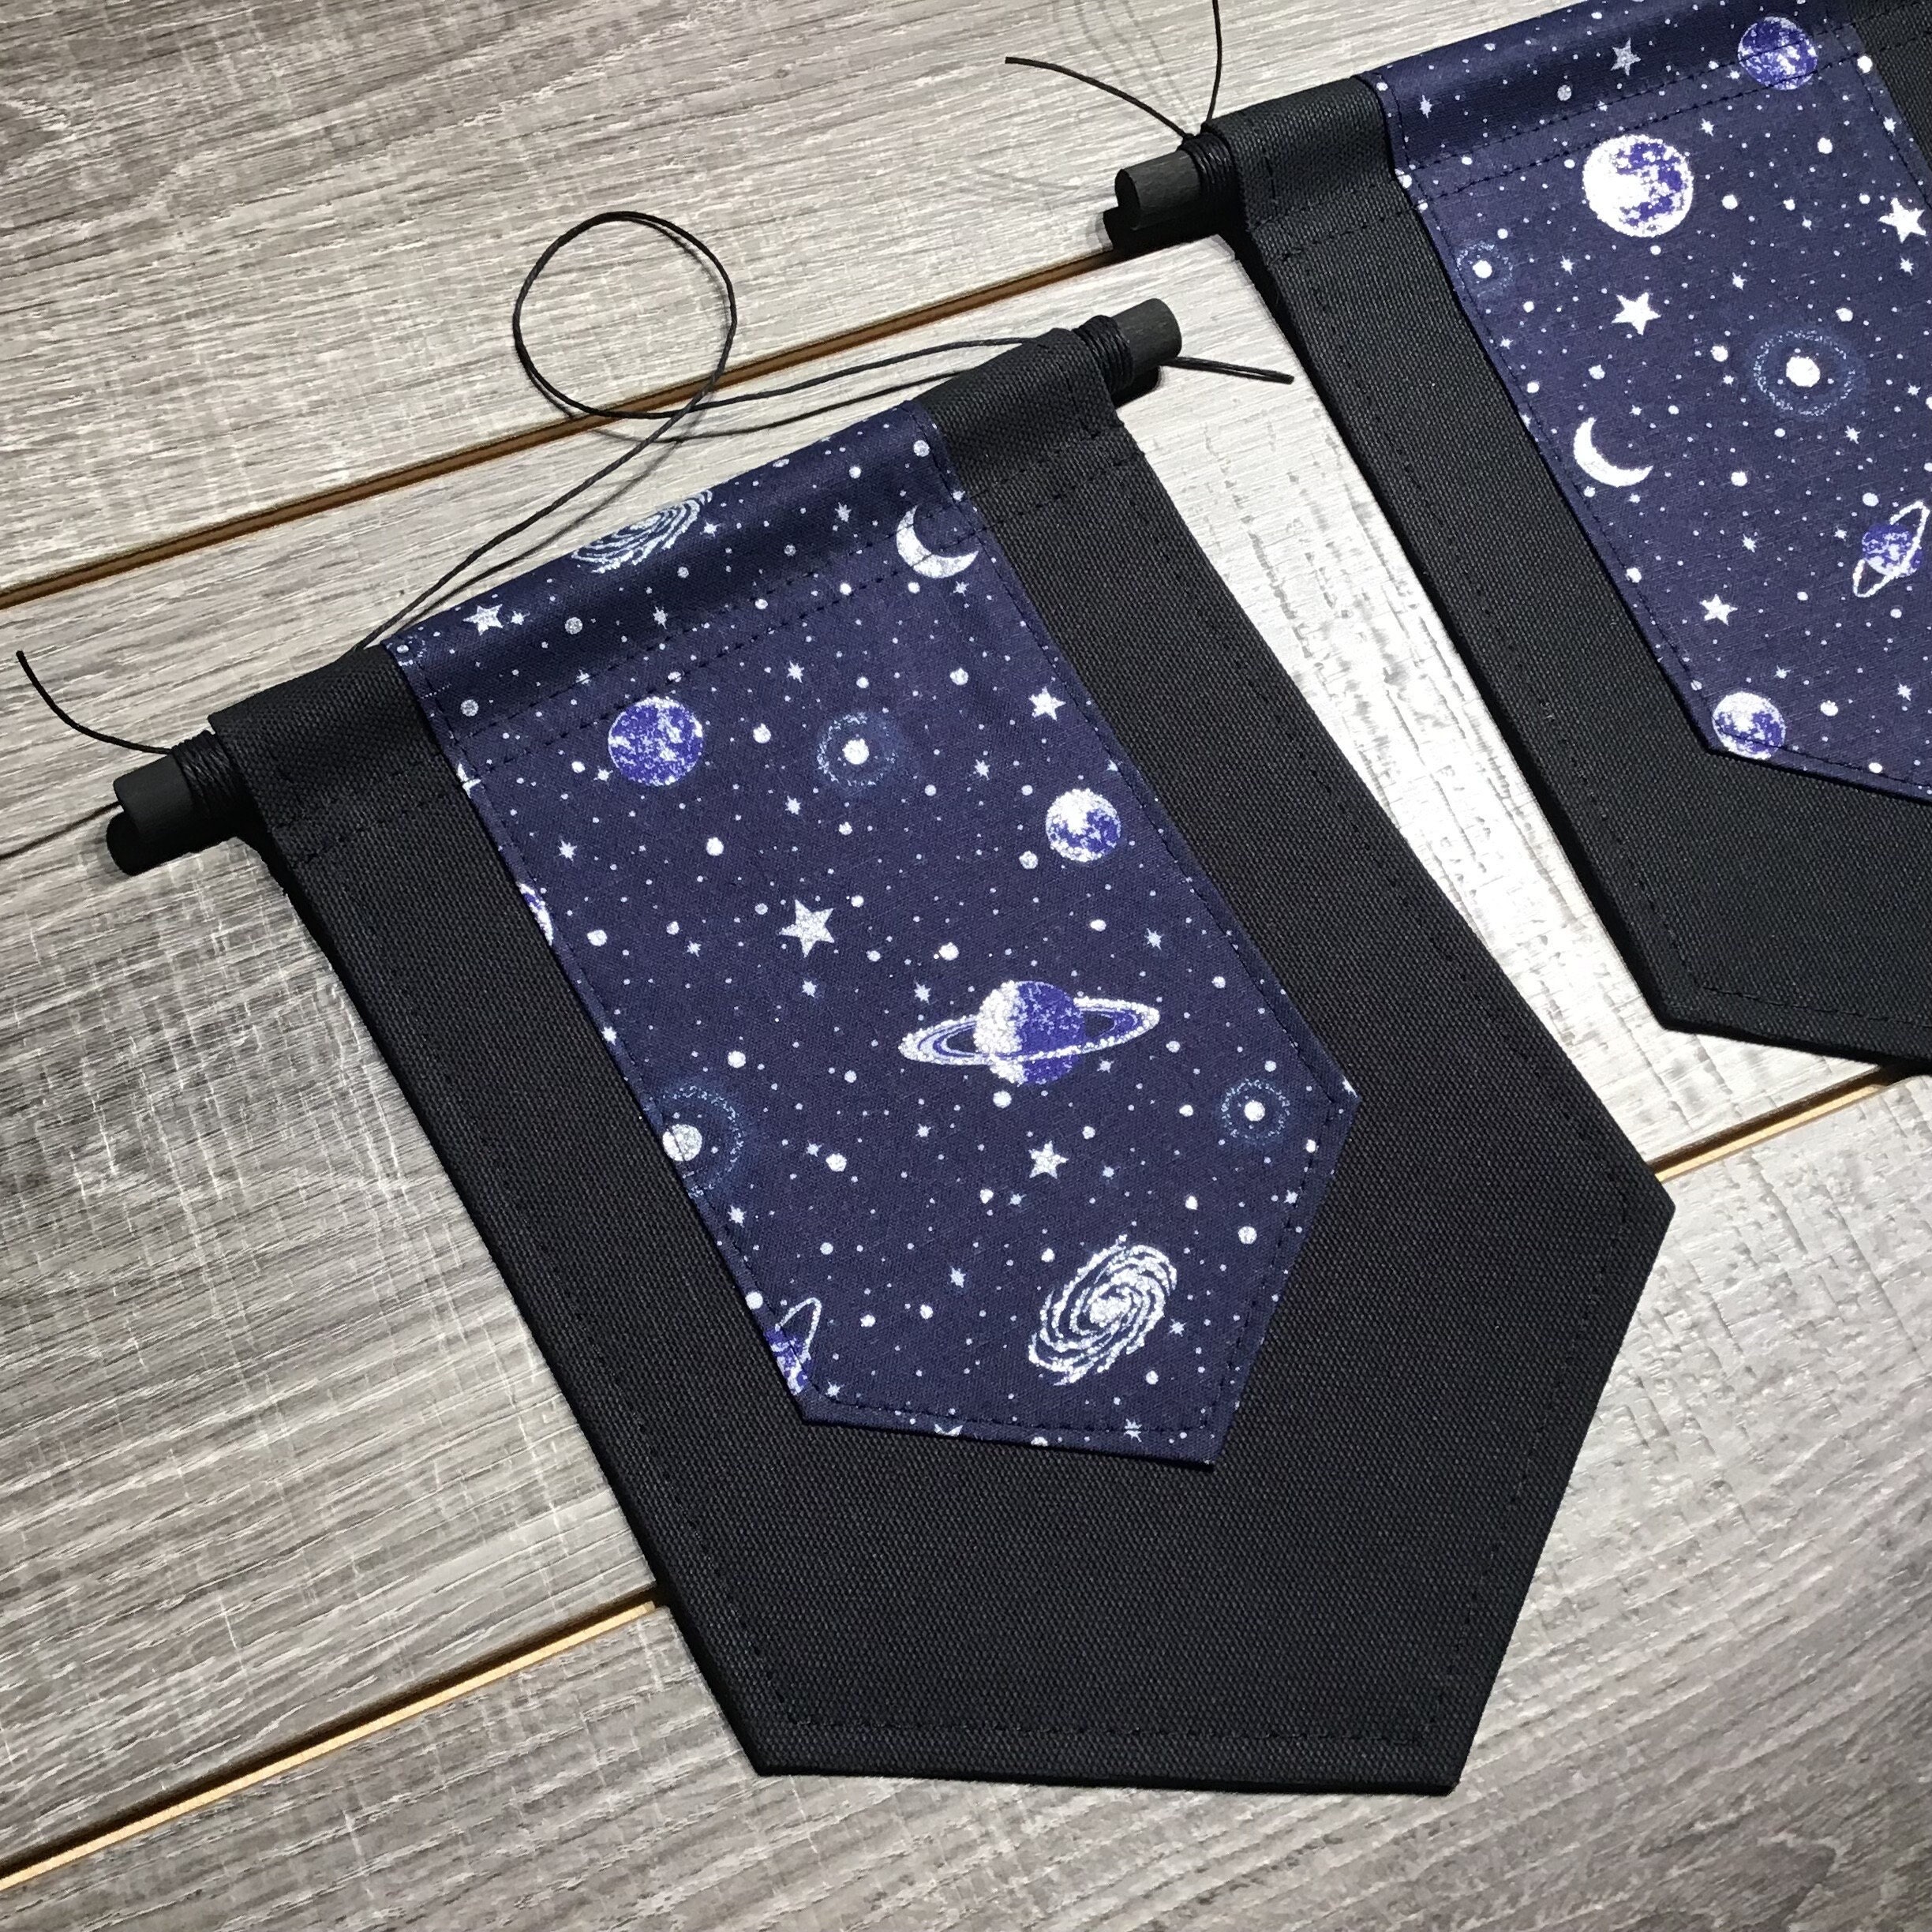 Are We There Yet Space Theme Colorful Galaxy Pop-Art Kids Pattern Acrylic  Tray by Colorpush